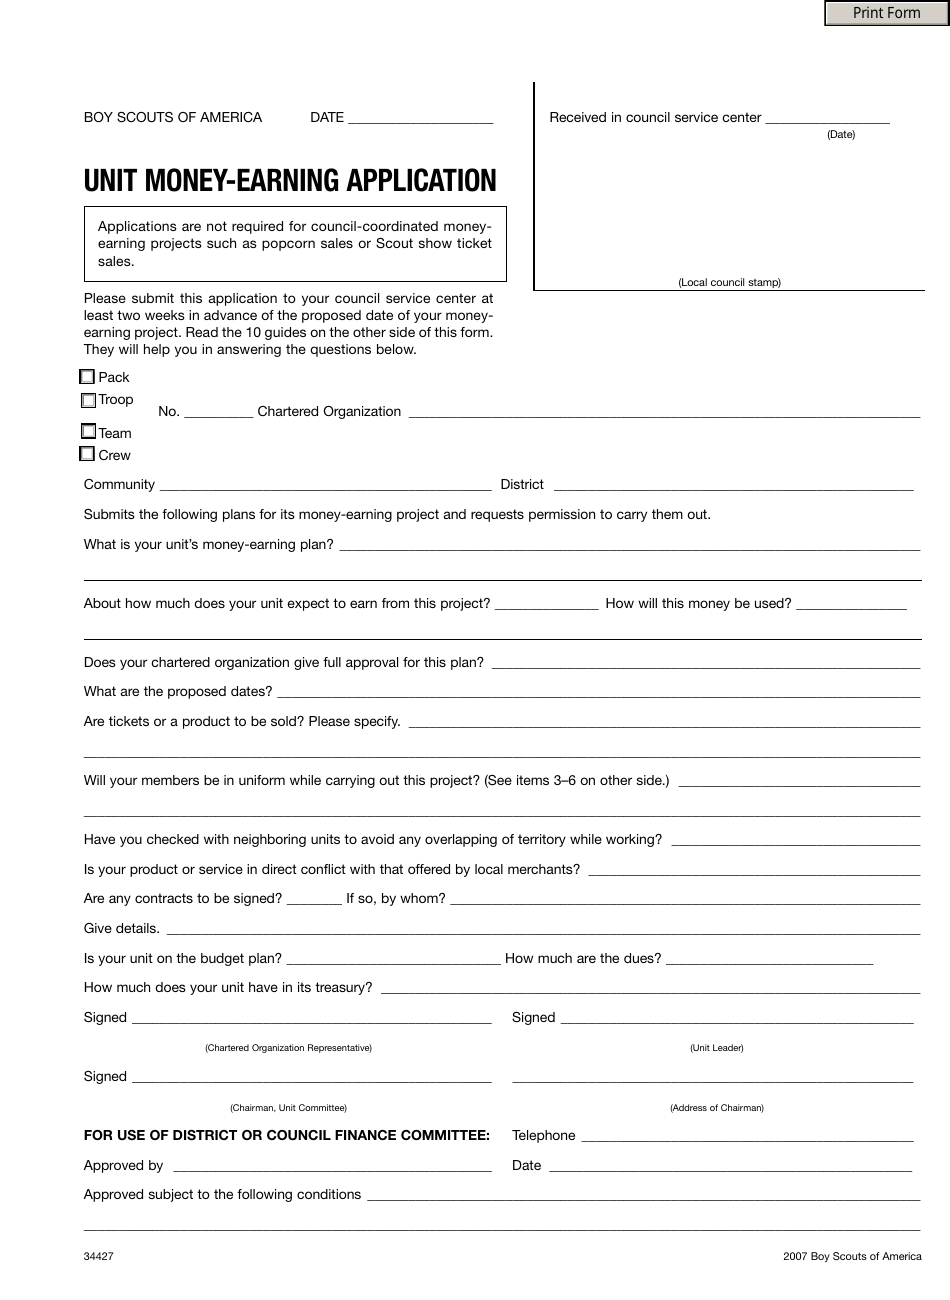 Form 34427 Unit Money-Earning Application - Boy Scouts of America, Page 1